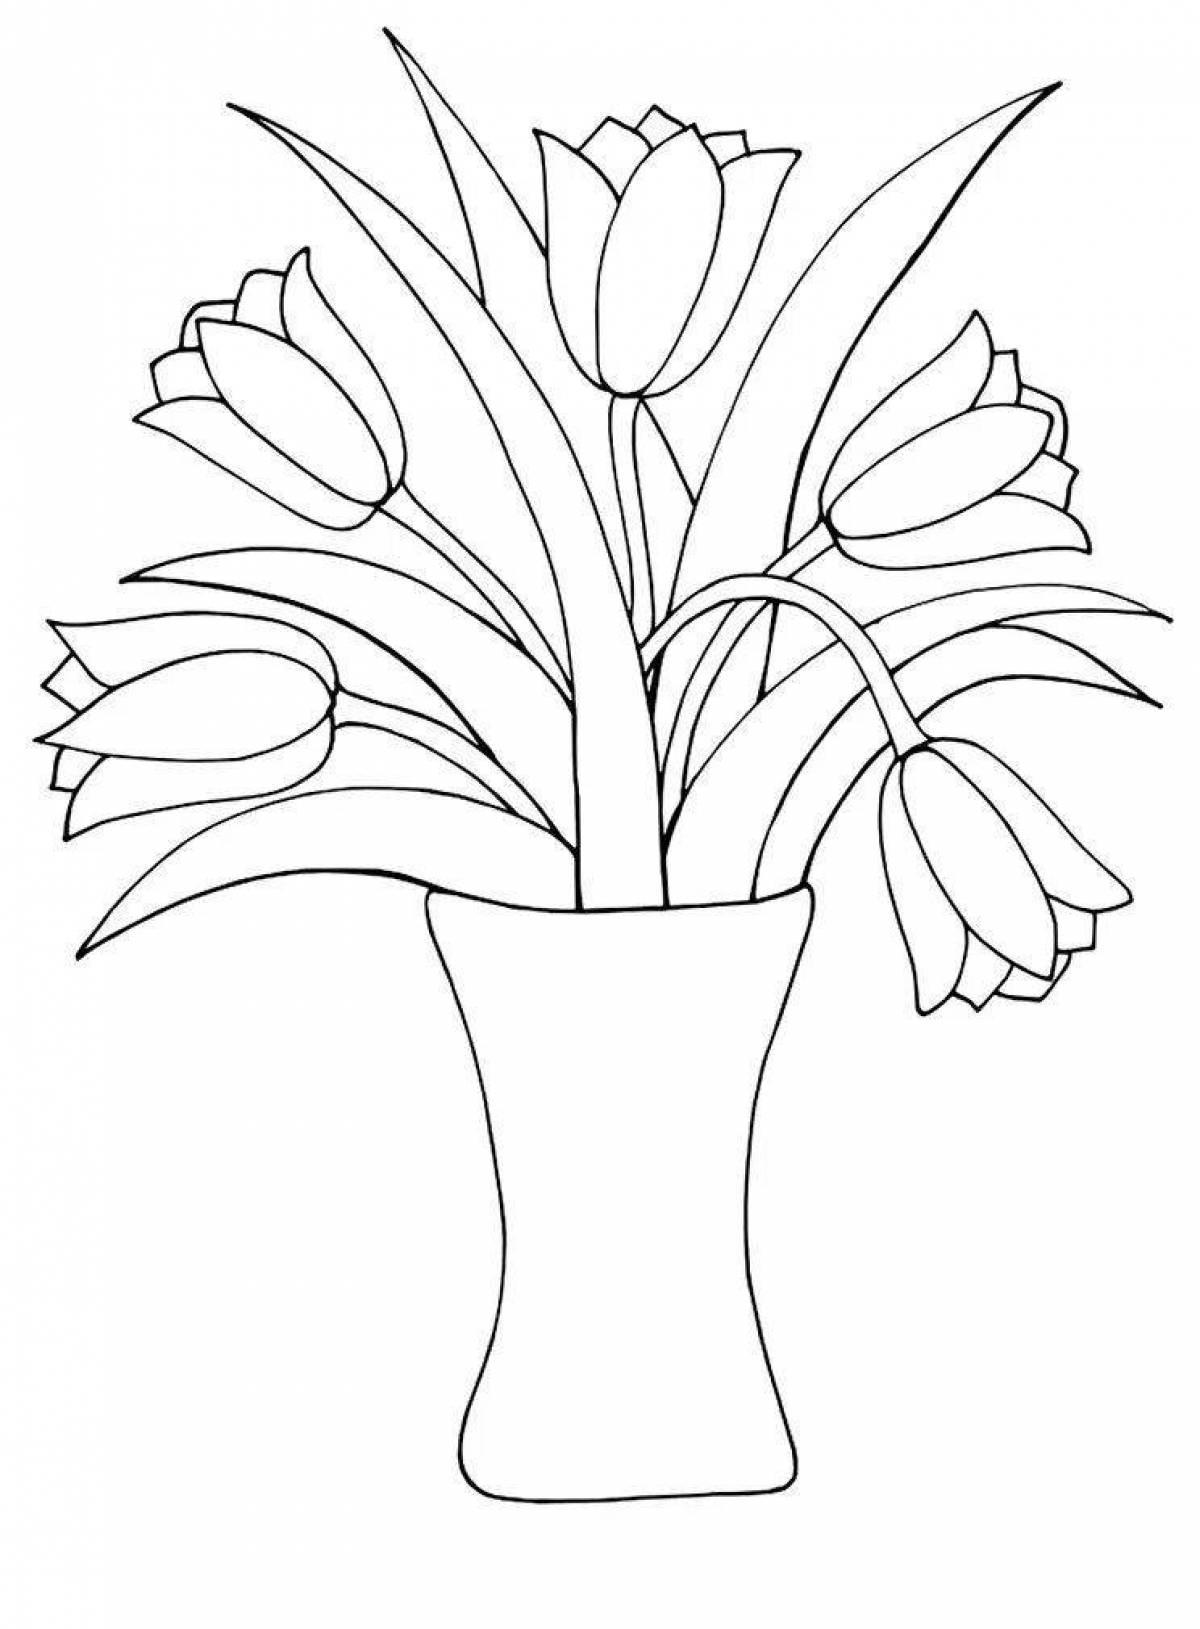 Coloring page merry gulder